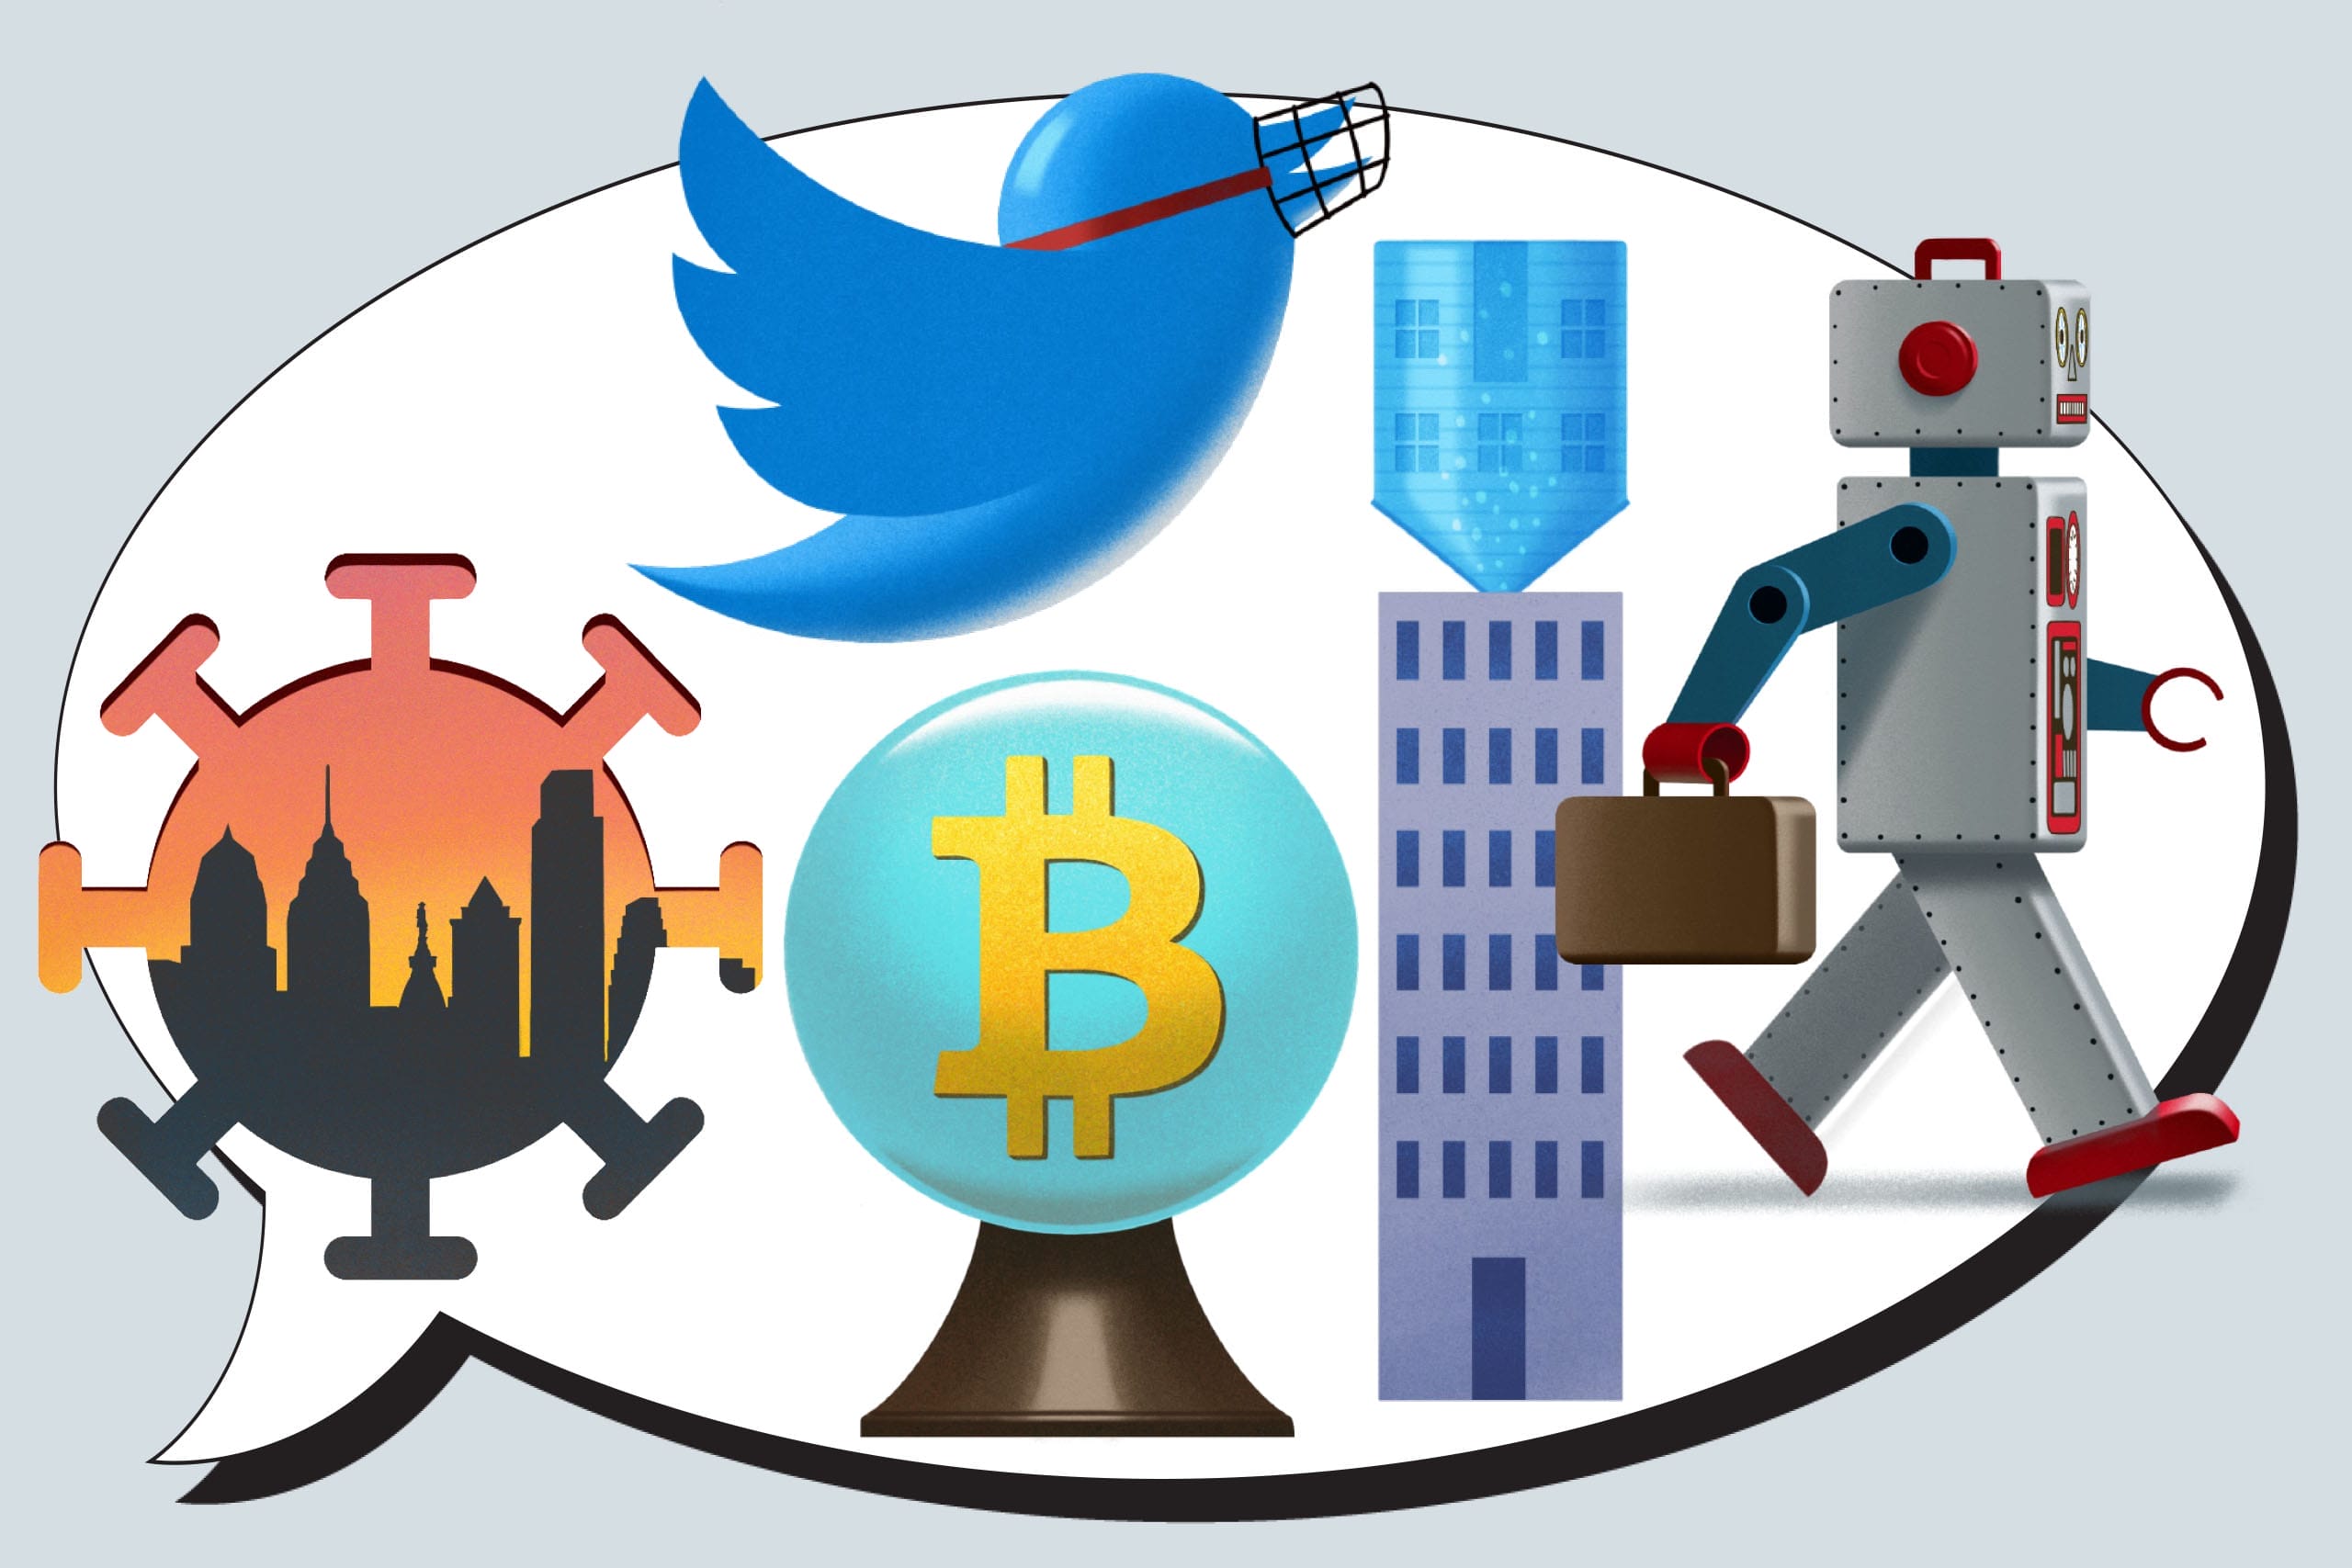 Conceptual illustration of a city silhouette on a COVID spore, a bitcoin symbol in a crystal ball, a Twitter bird with a muzzle beak, a home upside down on top of an office building, and a robot carrying a briefcase.